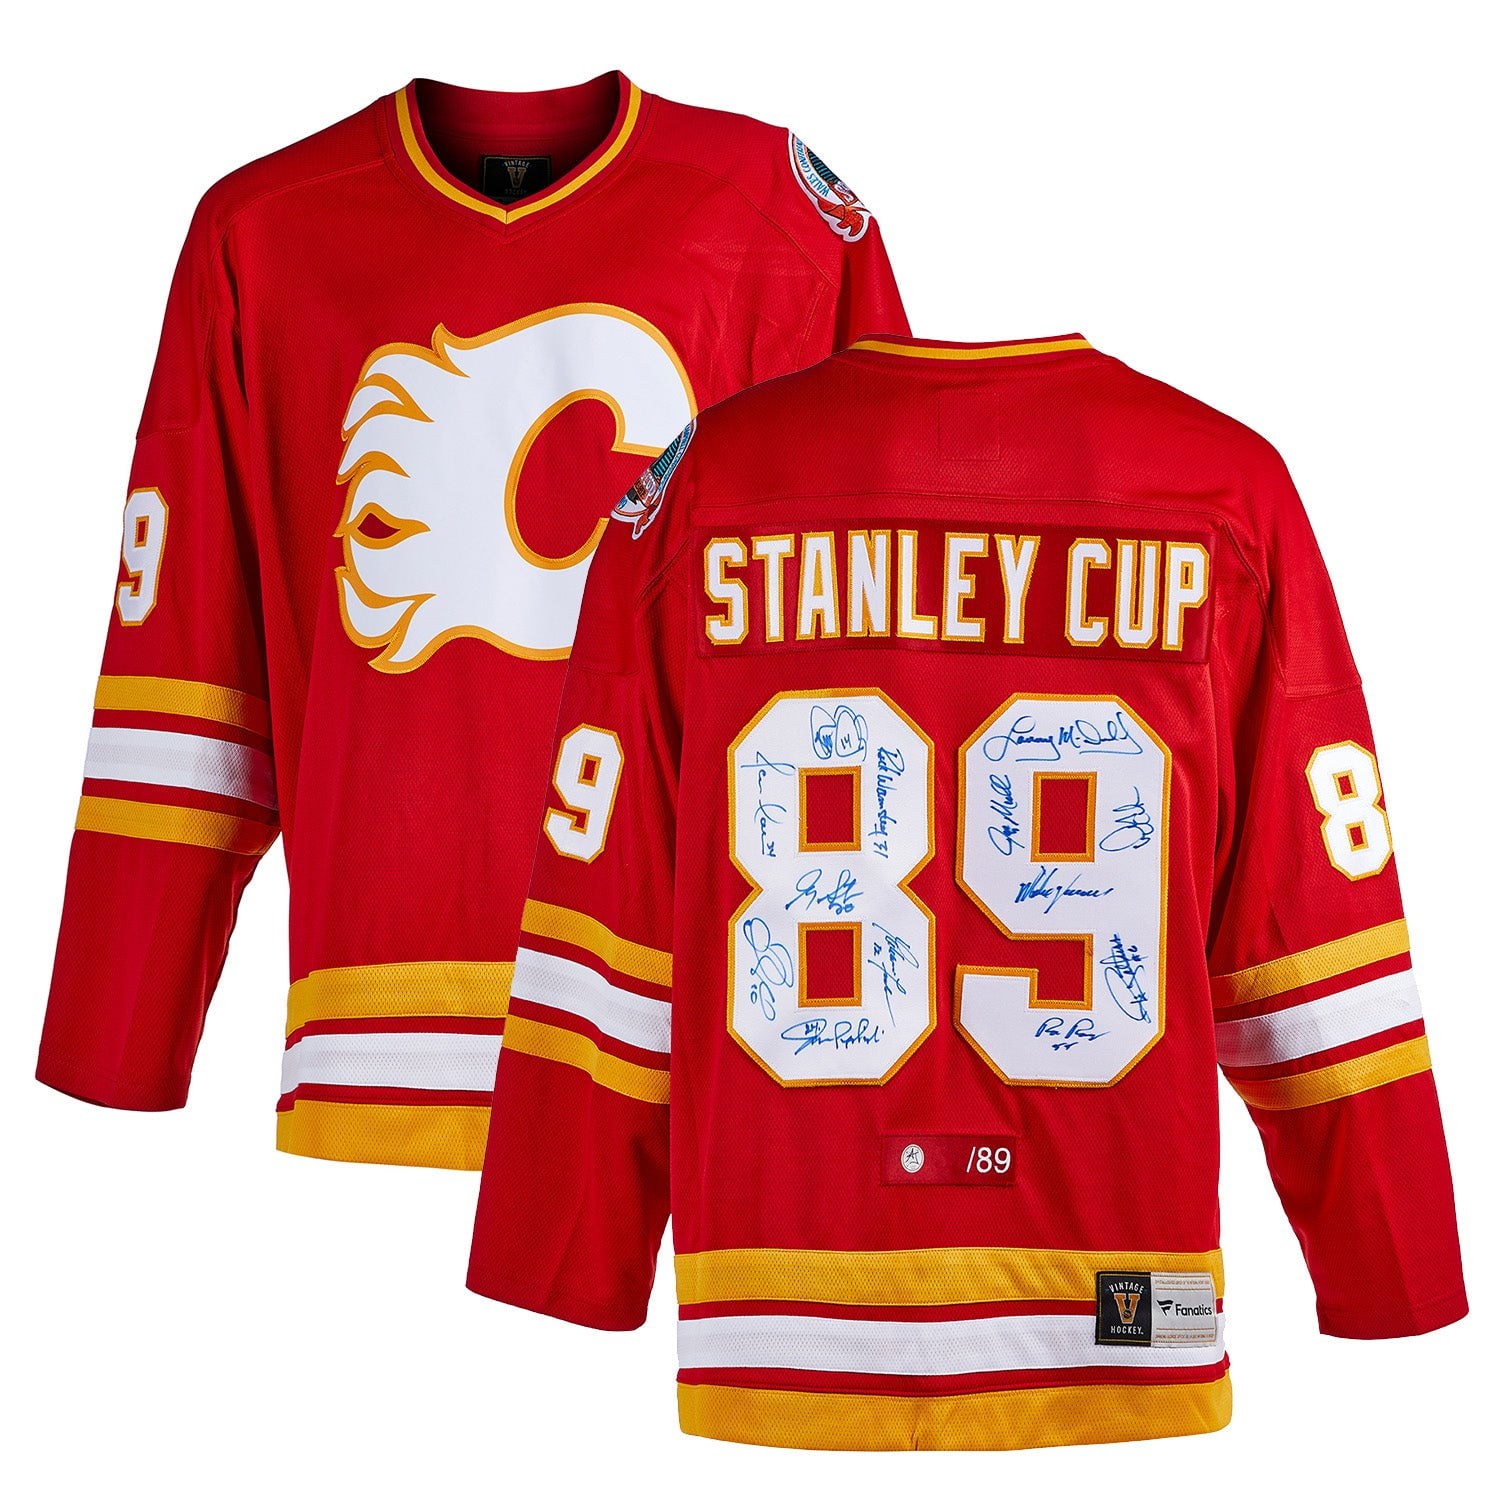 Calgary Flames Autographed Jerseys, Signed Flames Jerseys